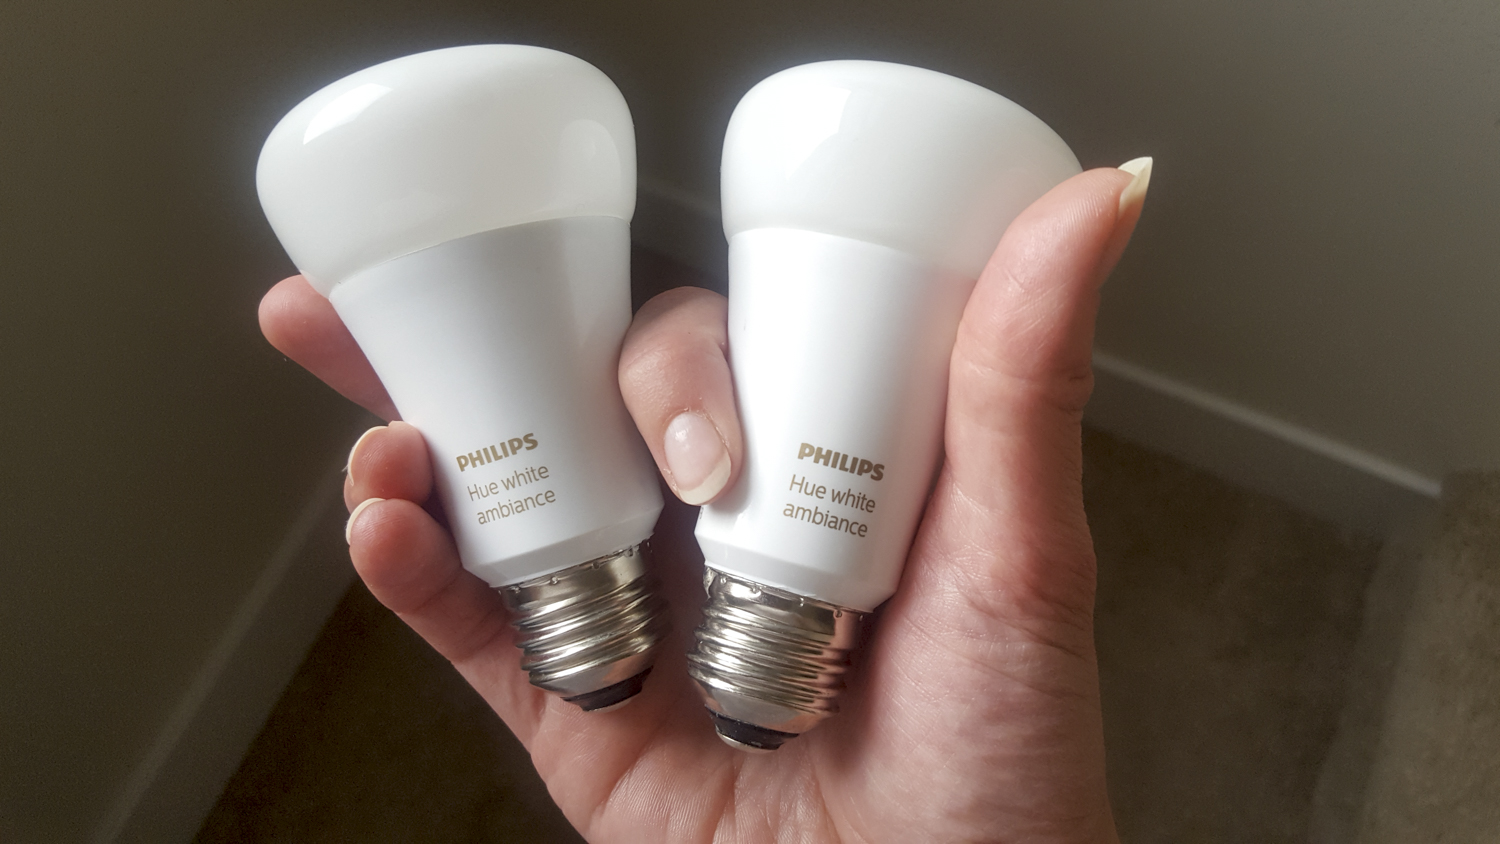  Philips Hue White Ambiance (Warm-White to Cool-White